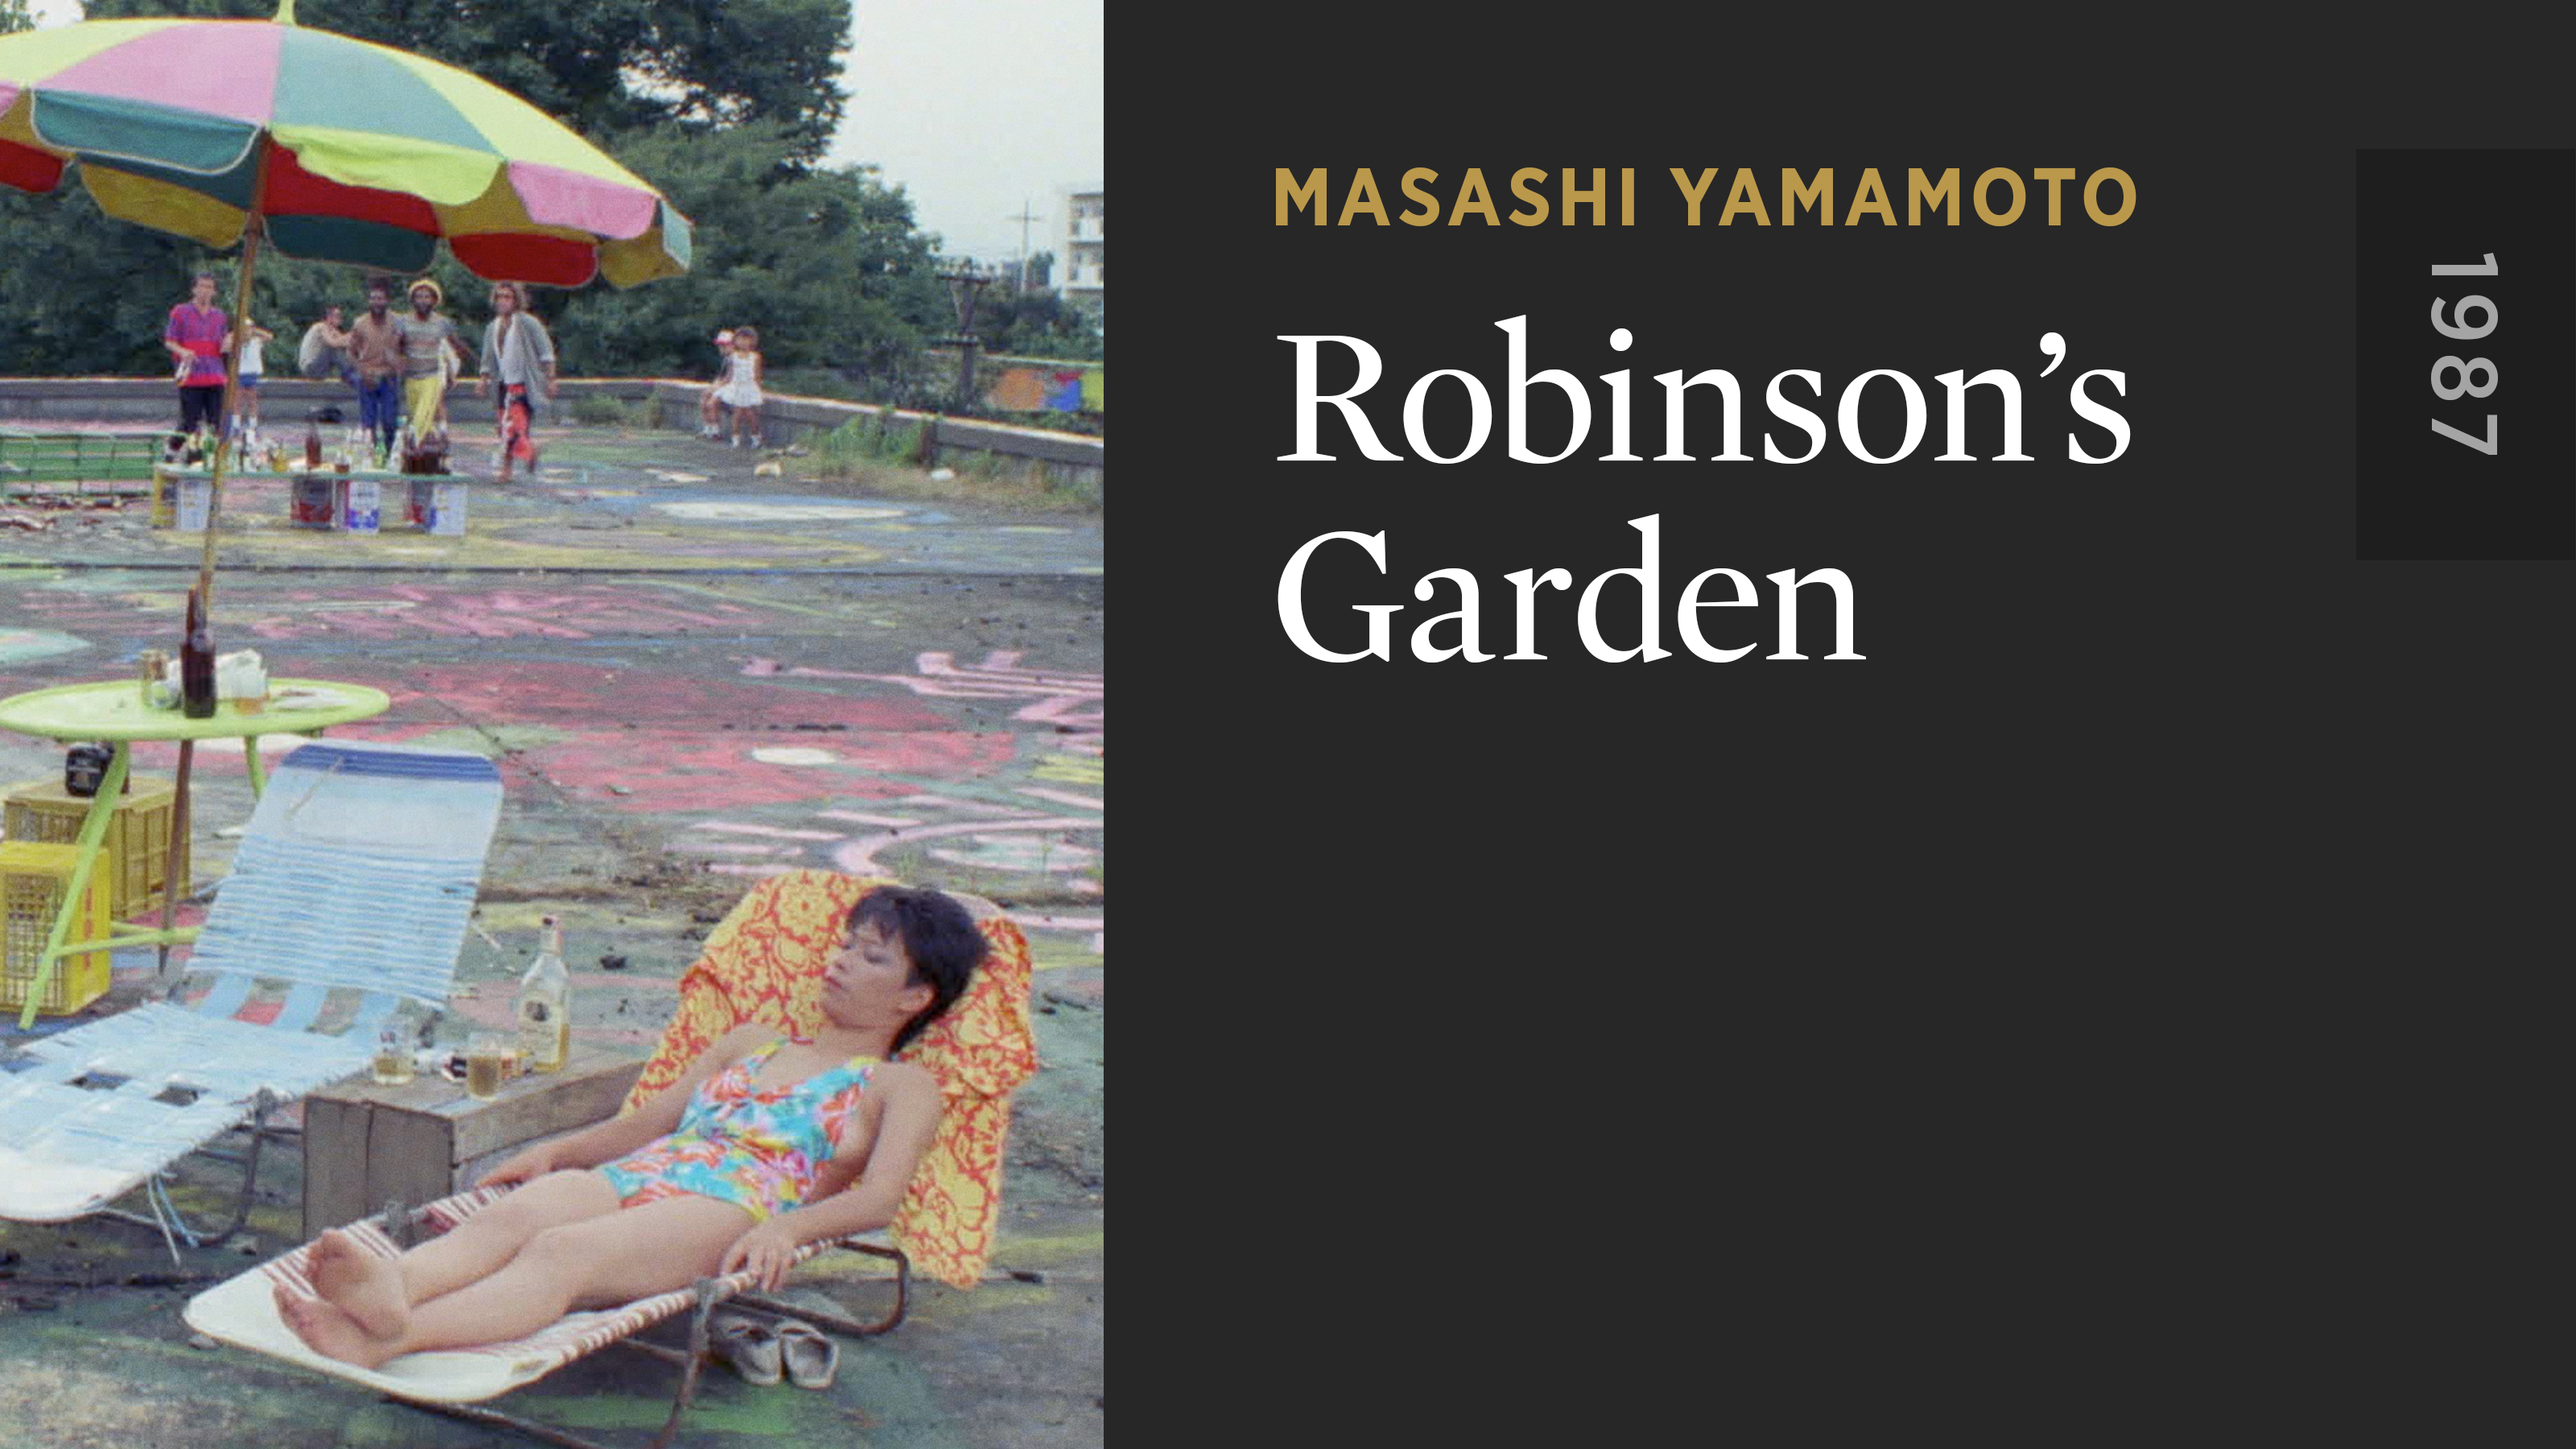 Two Films by Masashi Yamamoto - The Criterion Channel